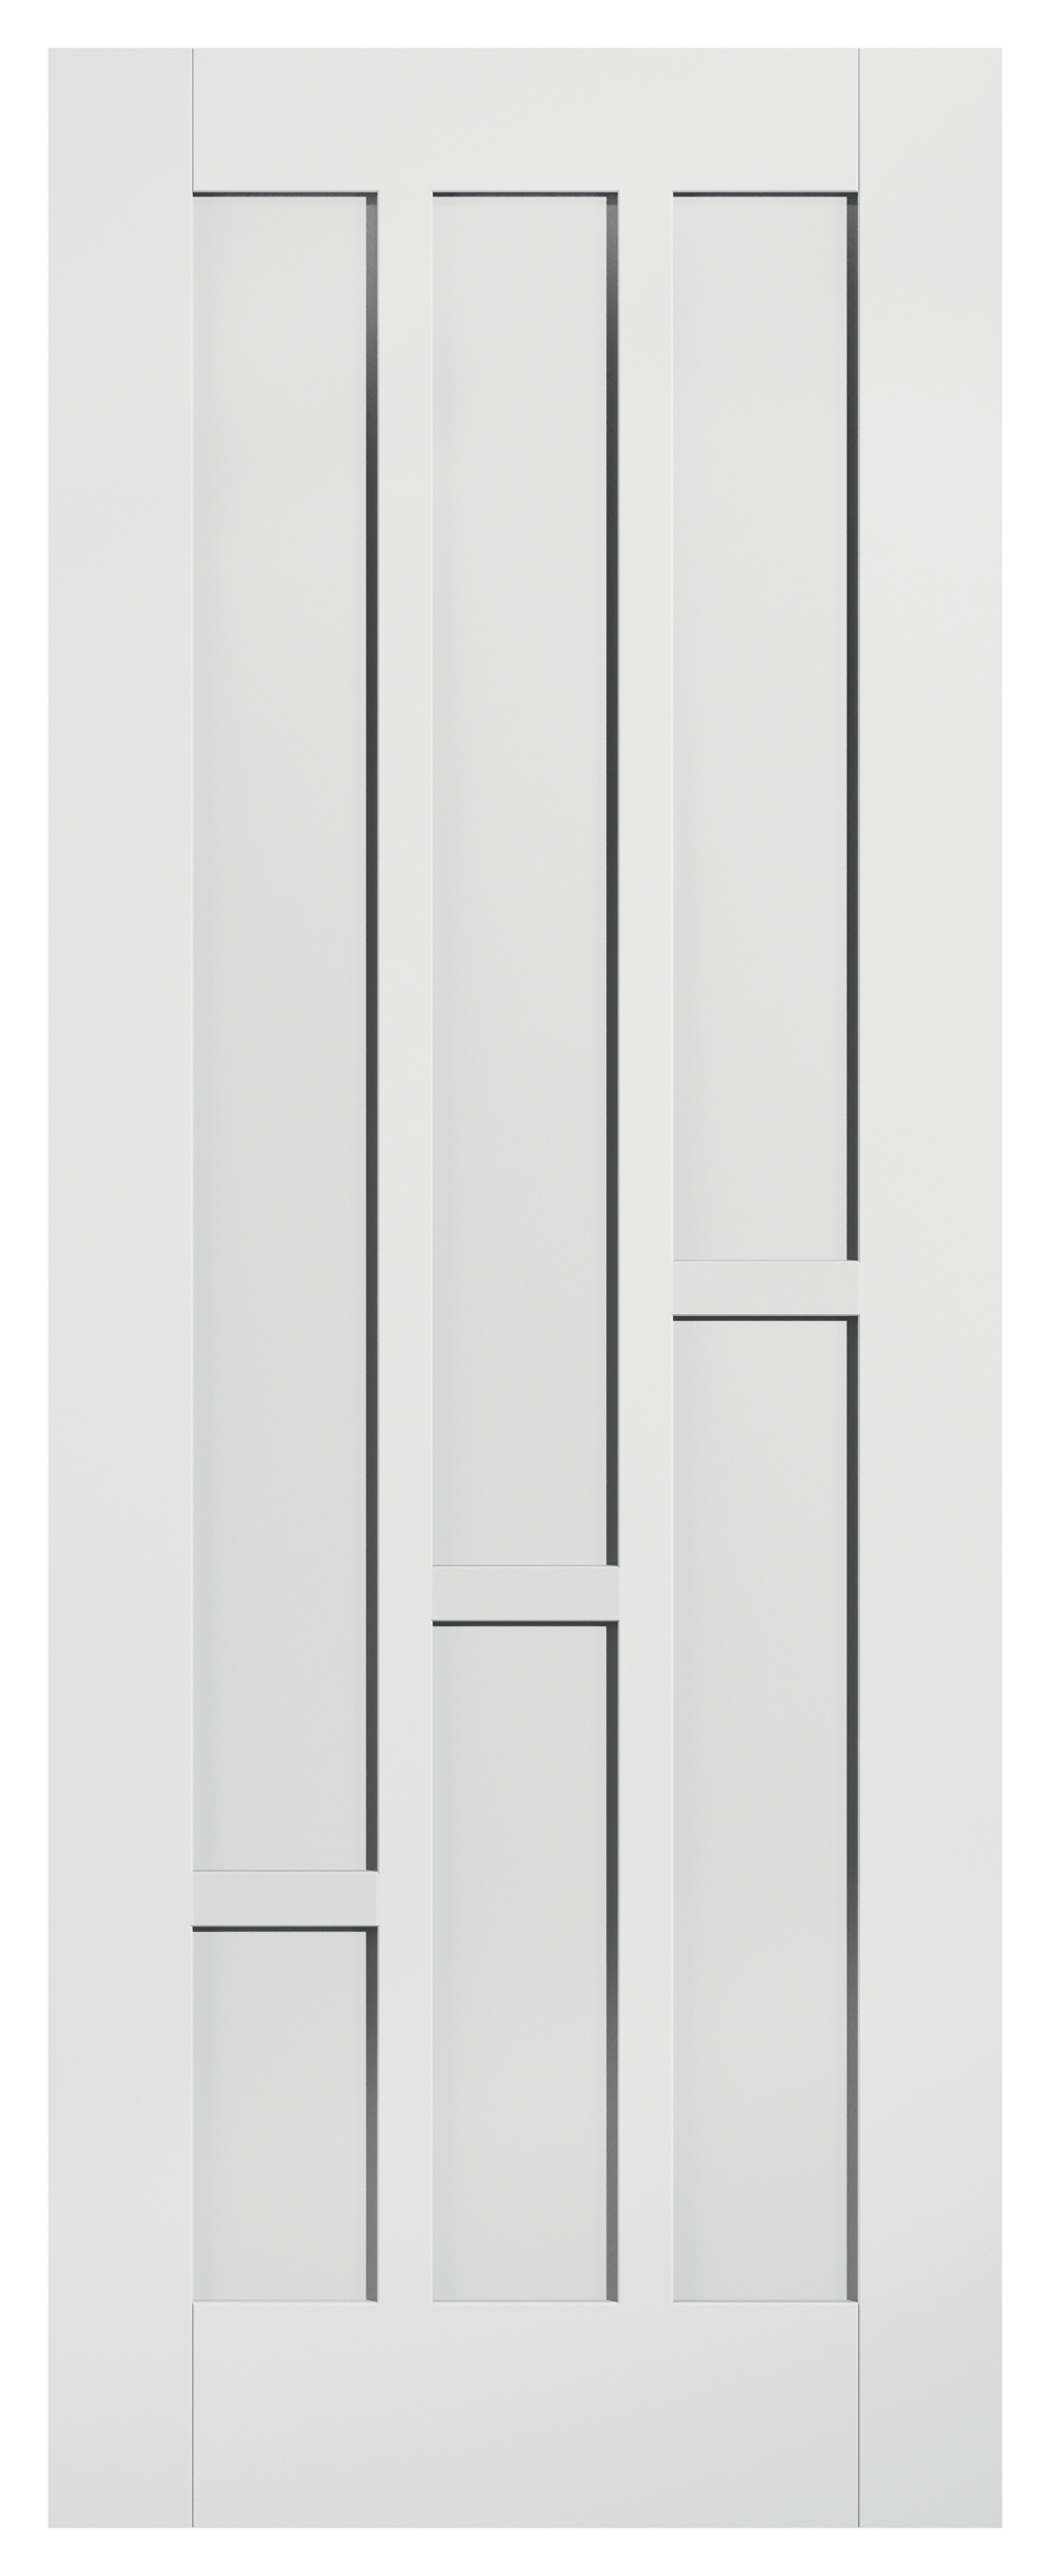 LPD Internal Coventry 6 Panel Primed White FD30 Fire Door - 762 x 1981mm